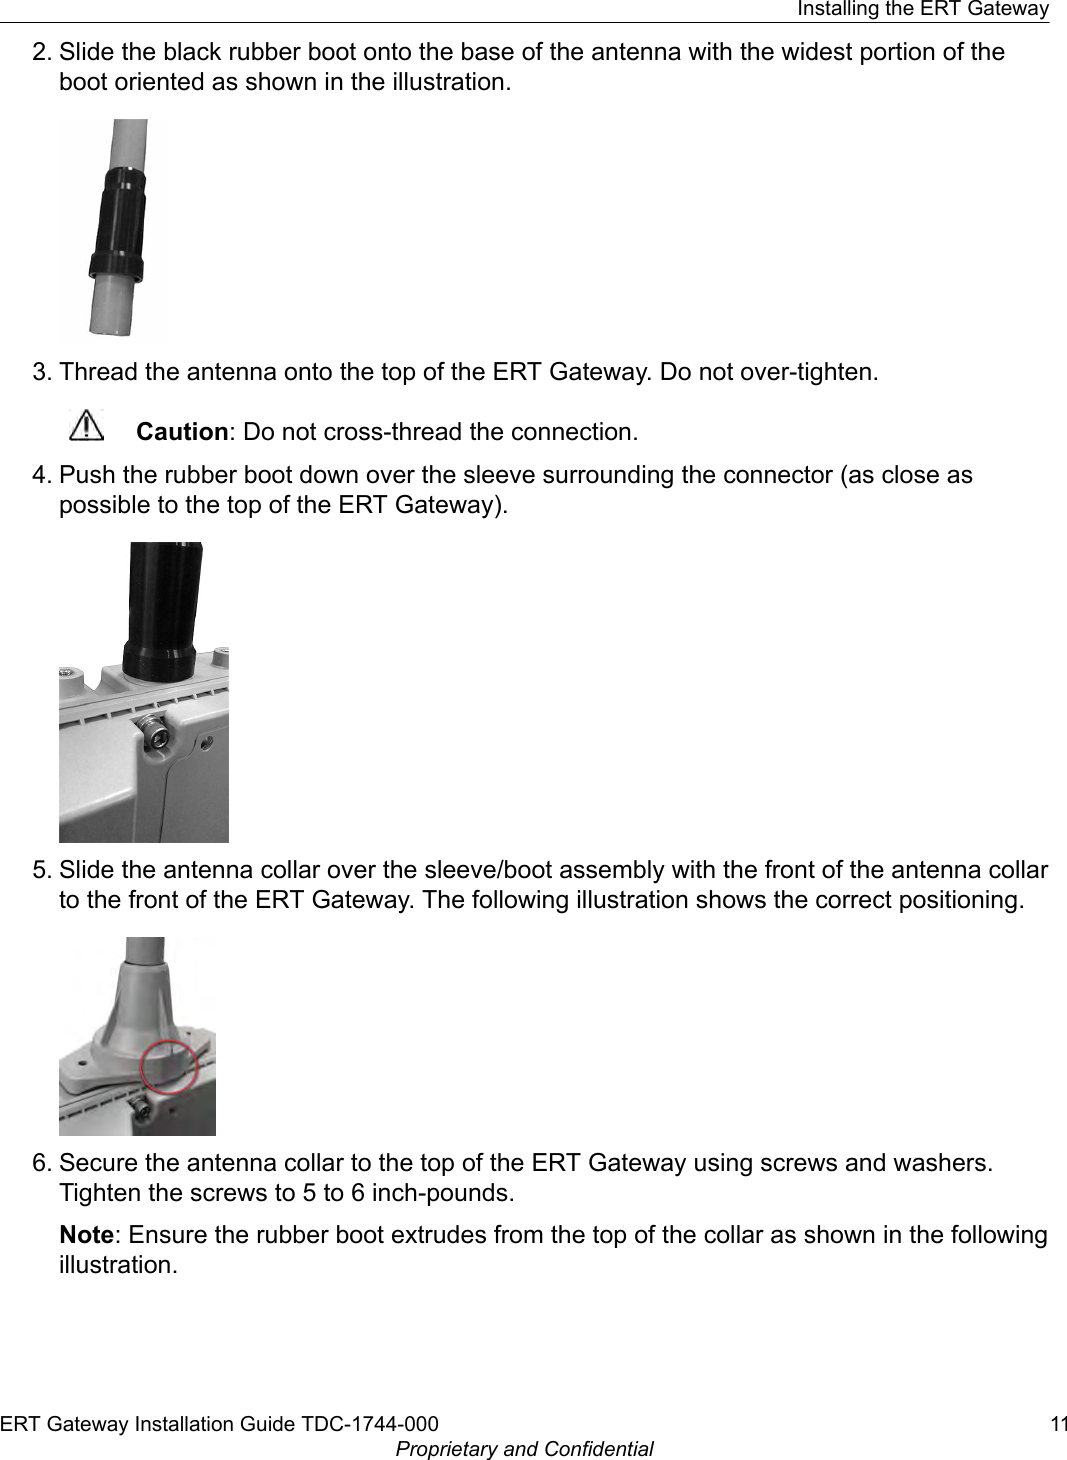 2. Slide the black rubber boot onto the base of the antenna with the widest portion of theboot oriented as shown in the illustration.3. Thread the antenna onto the top of the ERT Gateway. Do not over-tighten.Caution: Do not cross-thread the connection.4. Push the rubber boot down over the sleeve surrounding the connector (as close aspossible to the top of the ERT Gateway).5. Slide the antenna collar over the sleeve/boot assembly with the front of the antenna collarto the front of the ERT Gateway. The following illustration shows the correct positioning.6. Secure the antenna collar to the top of the ERT Gateway using screws and washers.Tighten the screws to 5 to 6 inch-pounds.Note: Ensure the rubber boot extrudes from the top of the collar as shown in the followingillustration.Installing the ERT GatewayERT Gateway Installation Guide TDC-1744-000 11Proprietary and Confidential